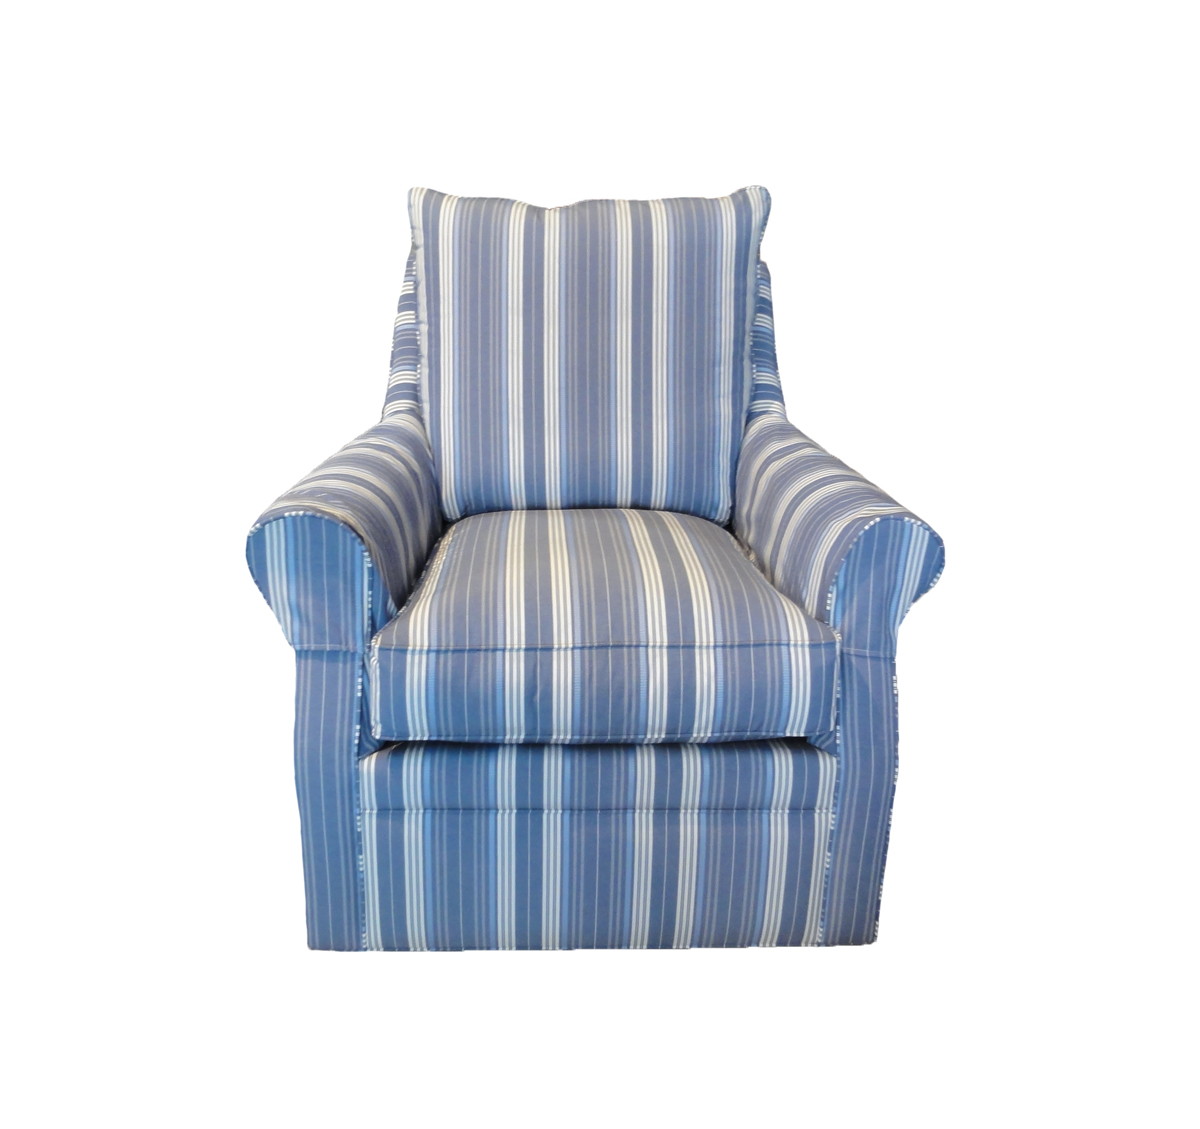 striped lachle swivel chair santa barbara design center sofa couch sectional loveseat chair